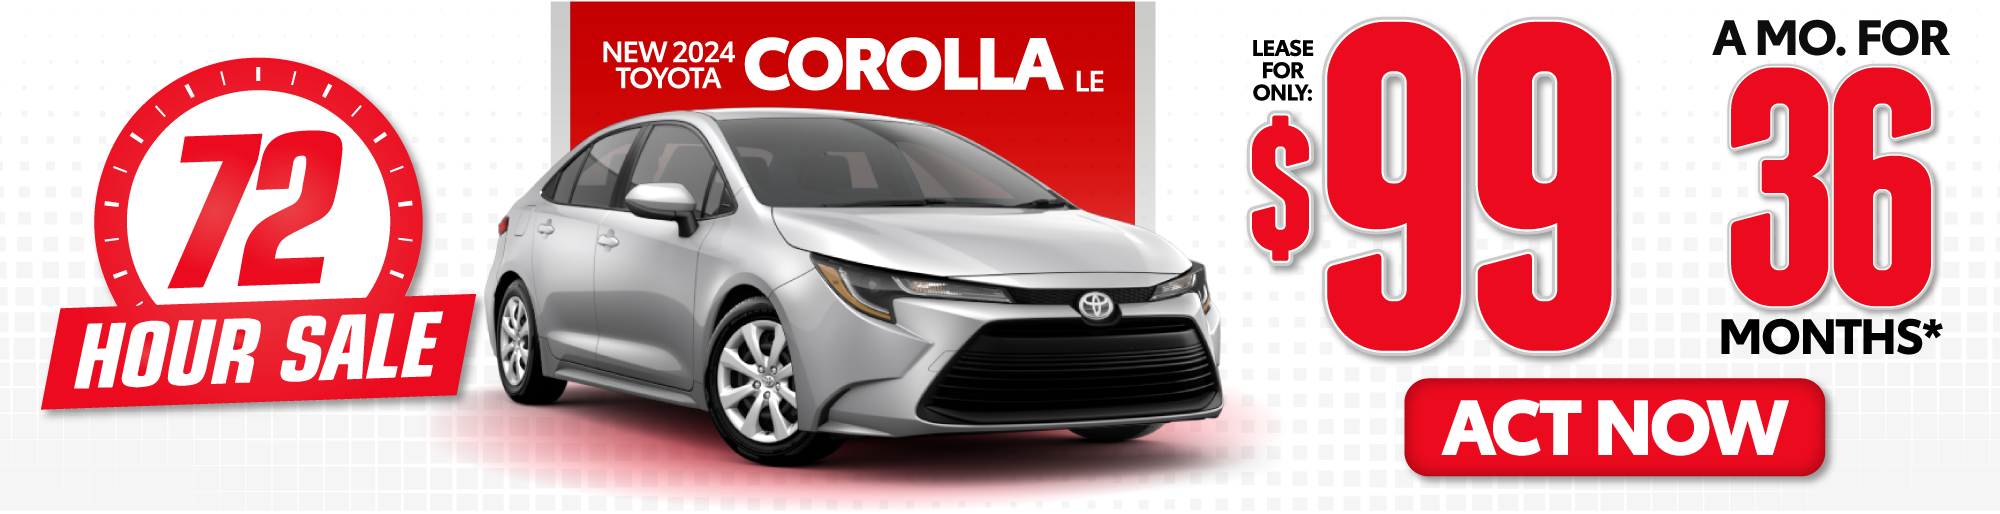 New 2023 Toyota Corolla LE Lease for only $99/mo.* ACT NOW